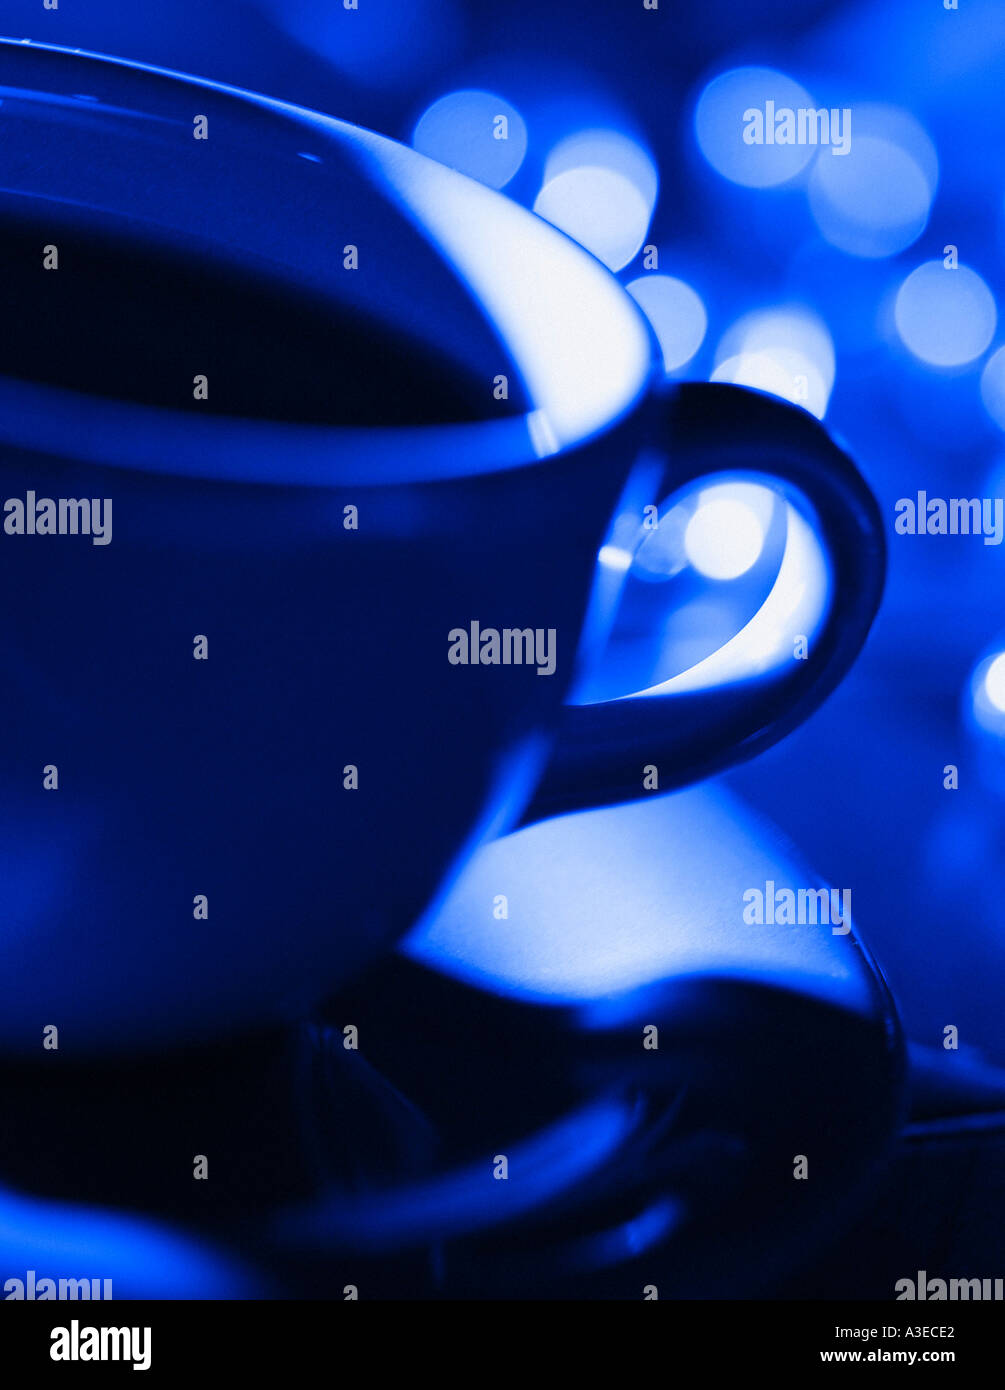 Close up of Coffee Cup and saucer with city lights in background bathed in deep blue light. Stock Photo